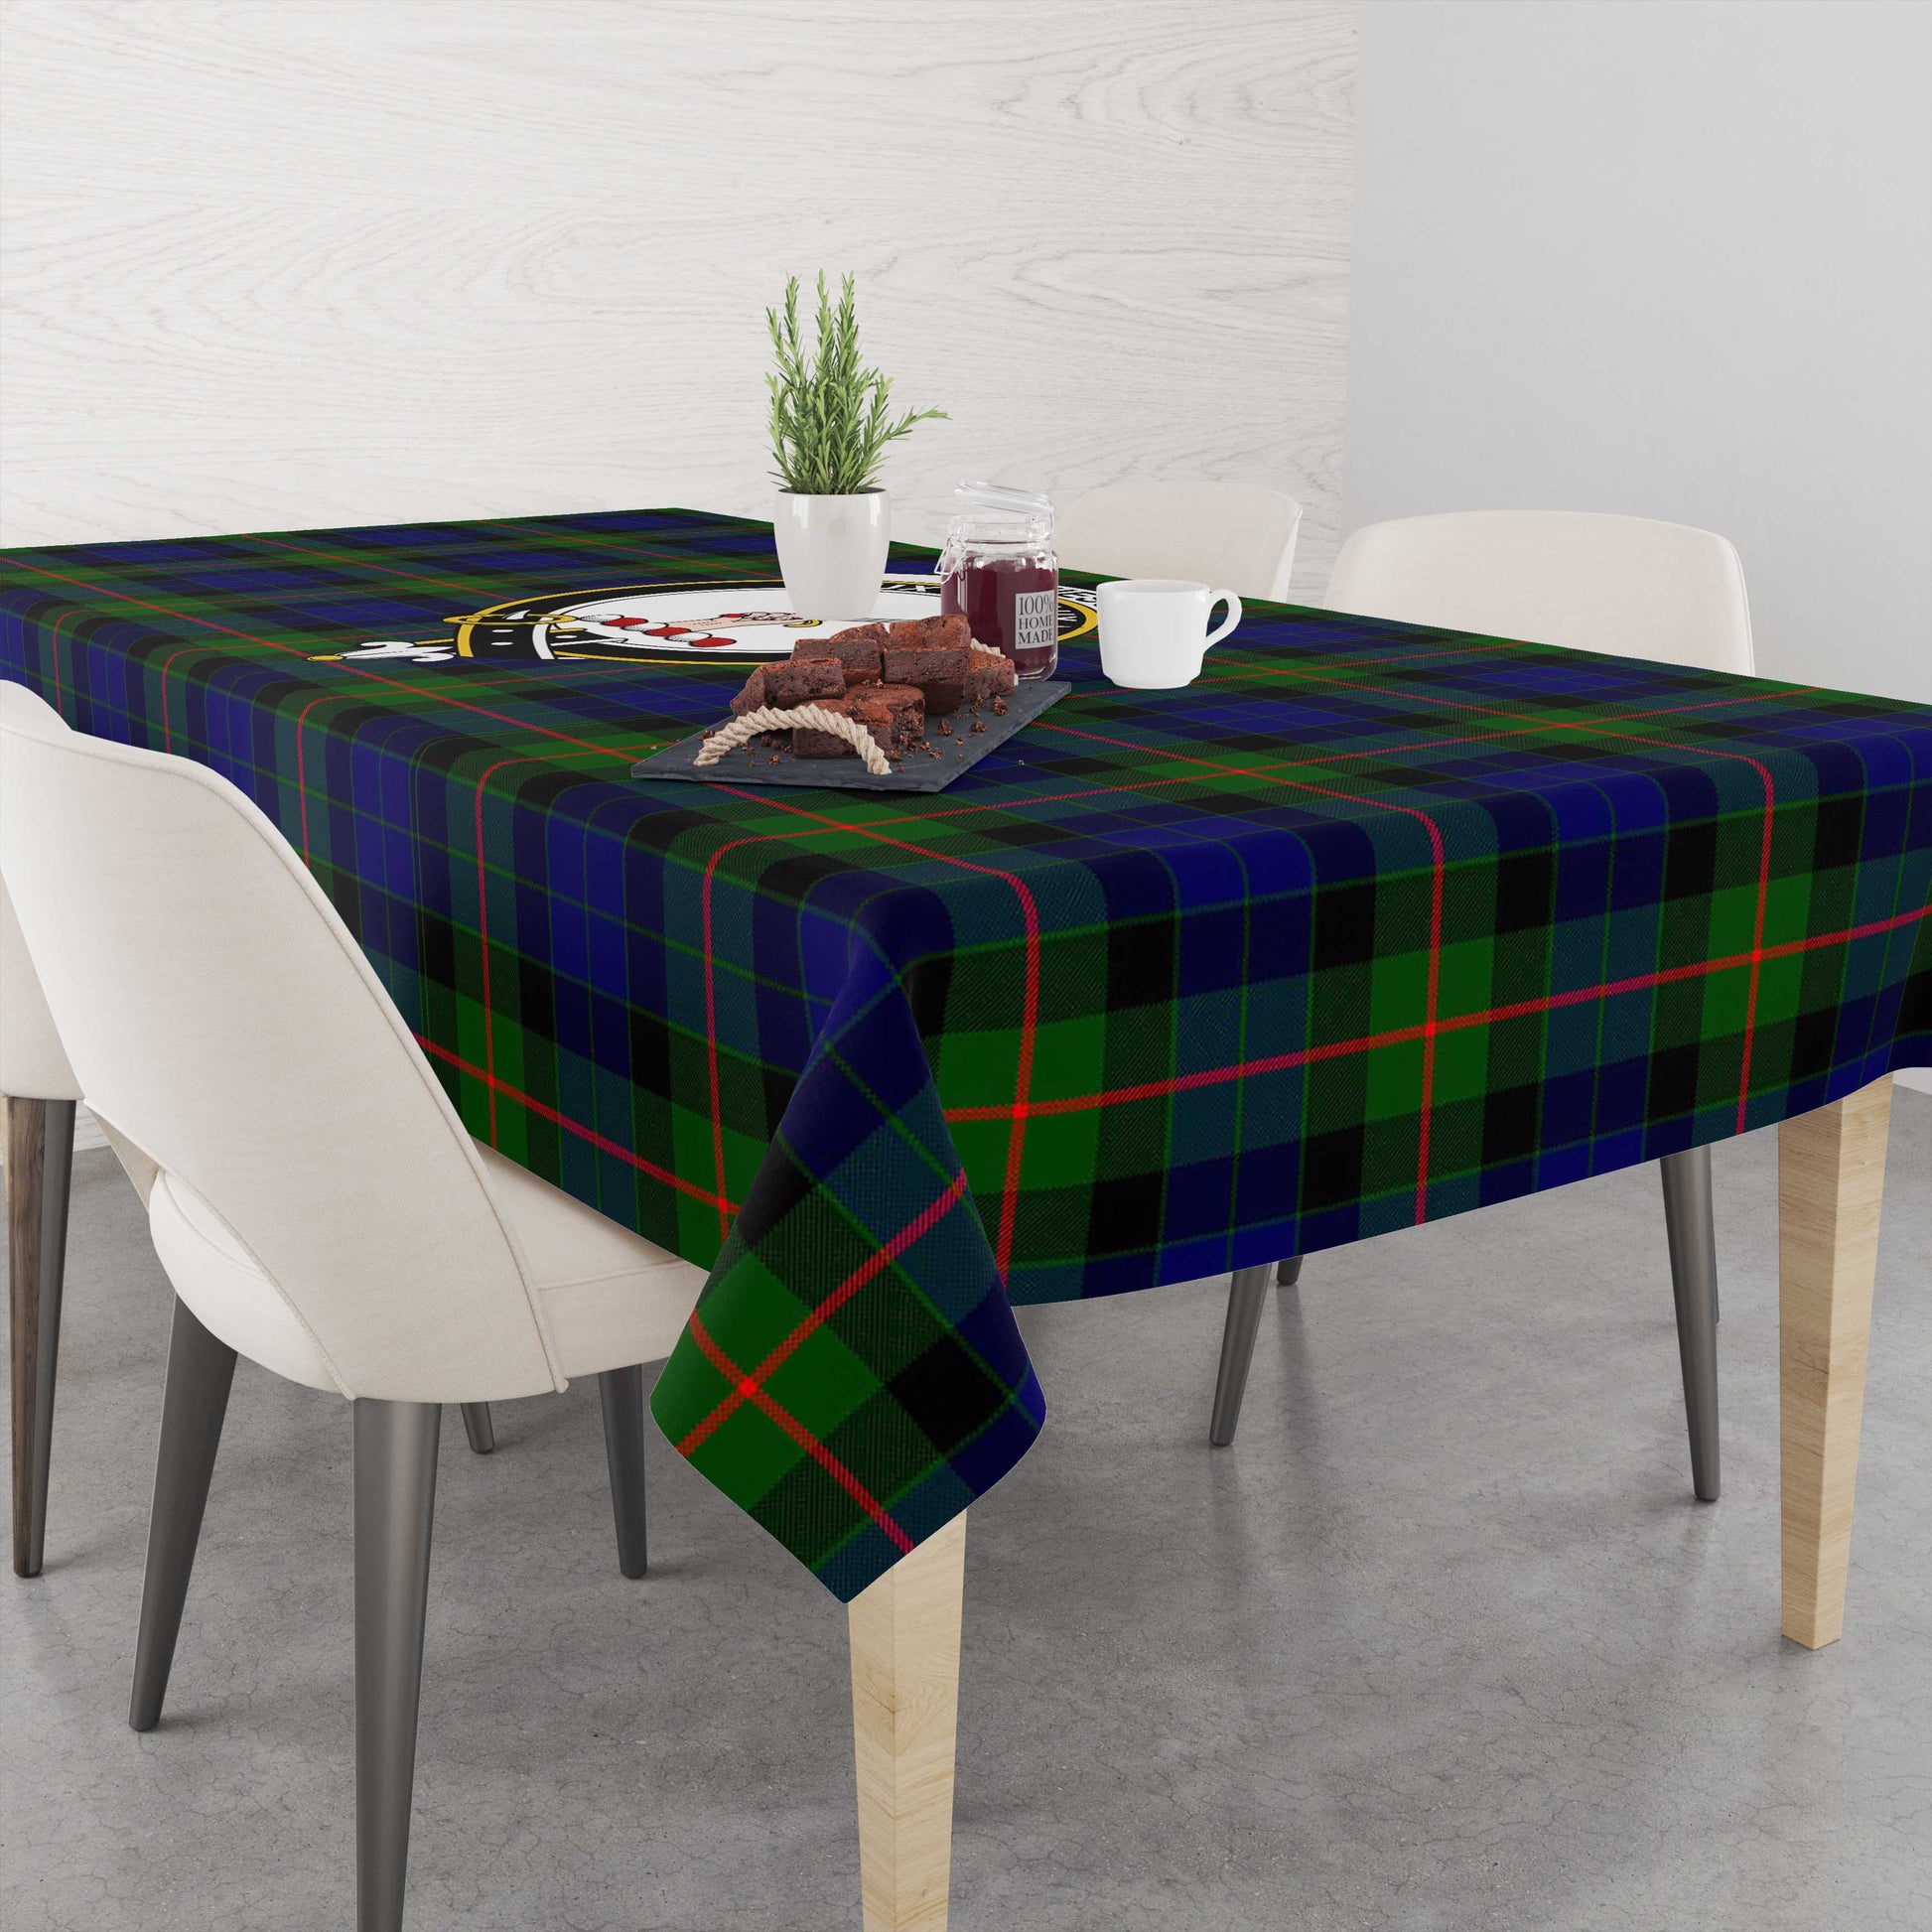 jamieson-tatan-tablecloth-with-family-crest